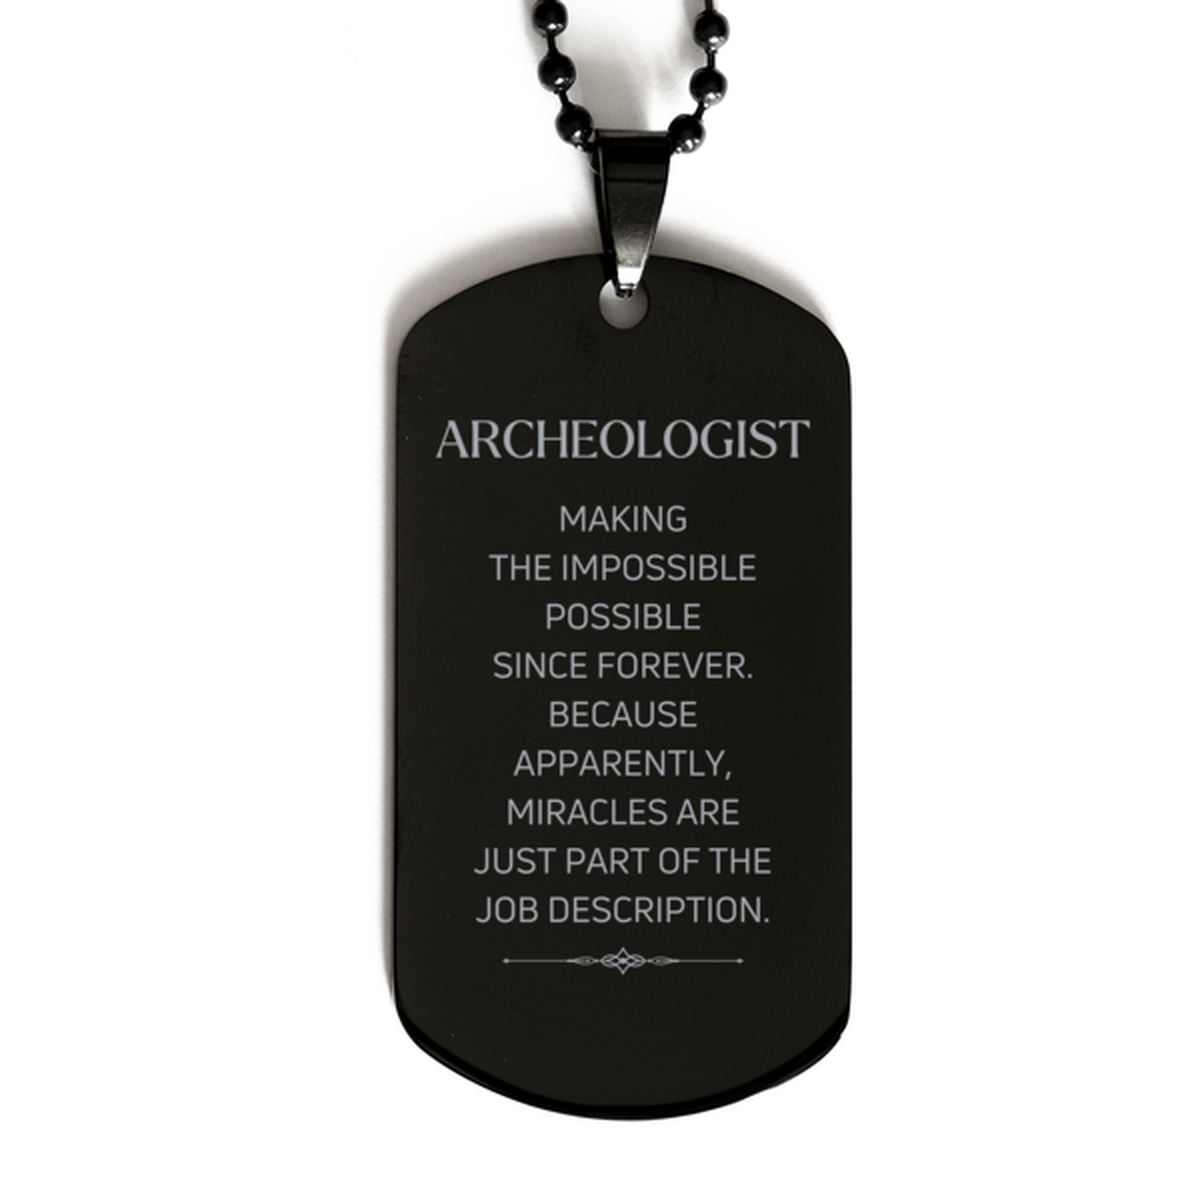 Funny Archeologist Gifts, Miracles are just part of the job description, Inspirational Birthday Black Dog Tag For Archeologist, Men, Women, Coworkers, Friends, Boss